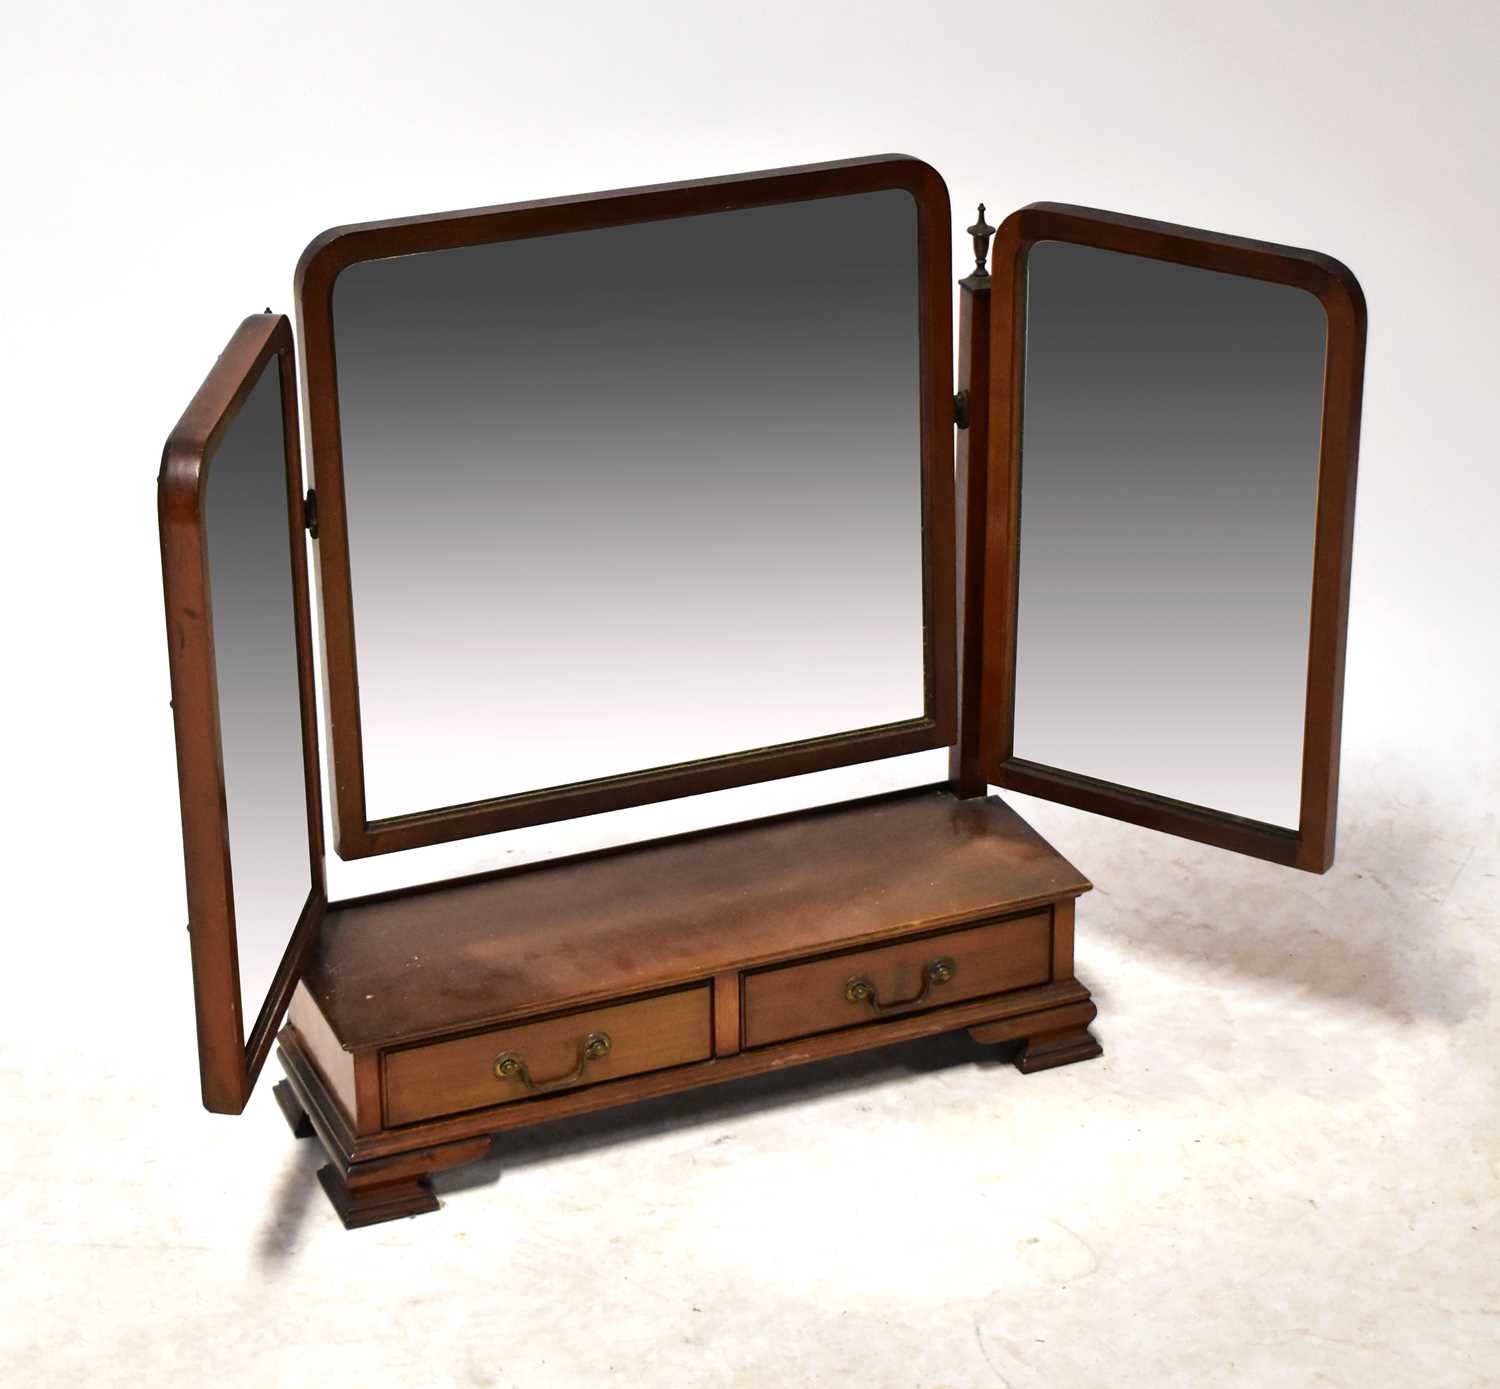 An Edwardian mahogany triptych dressing table mirror with two base drawers, raised on ogee bracket